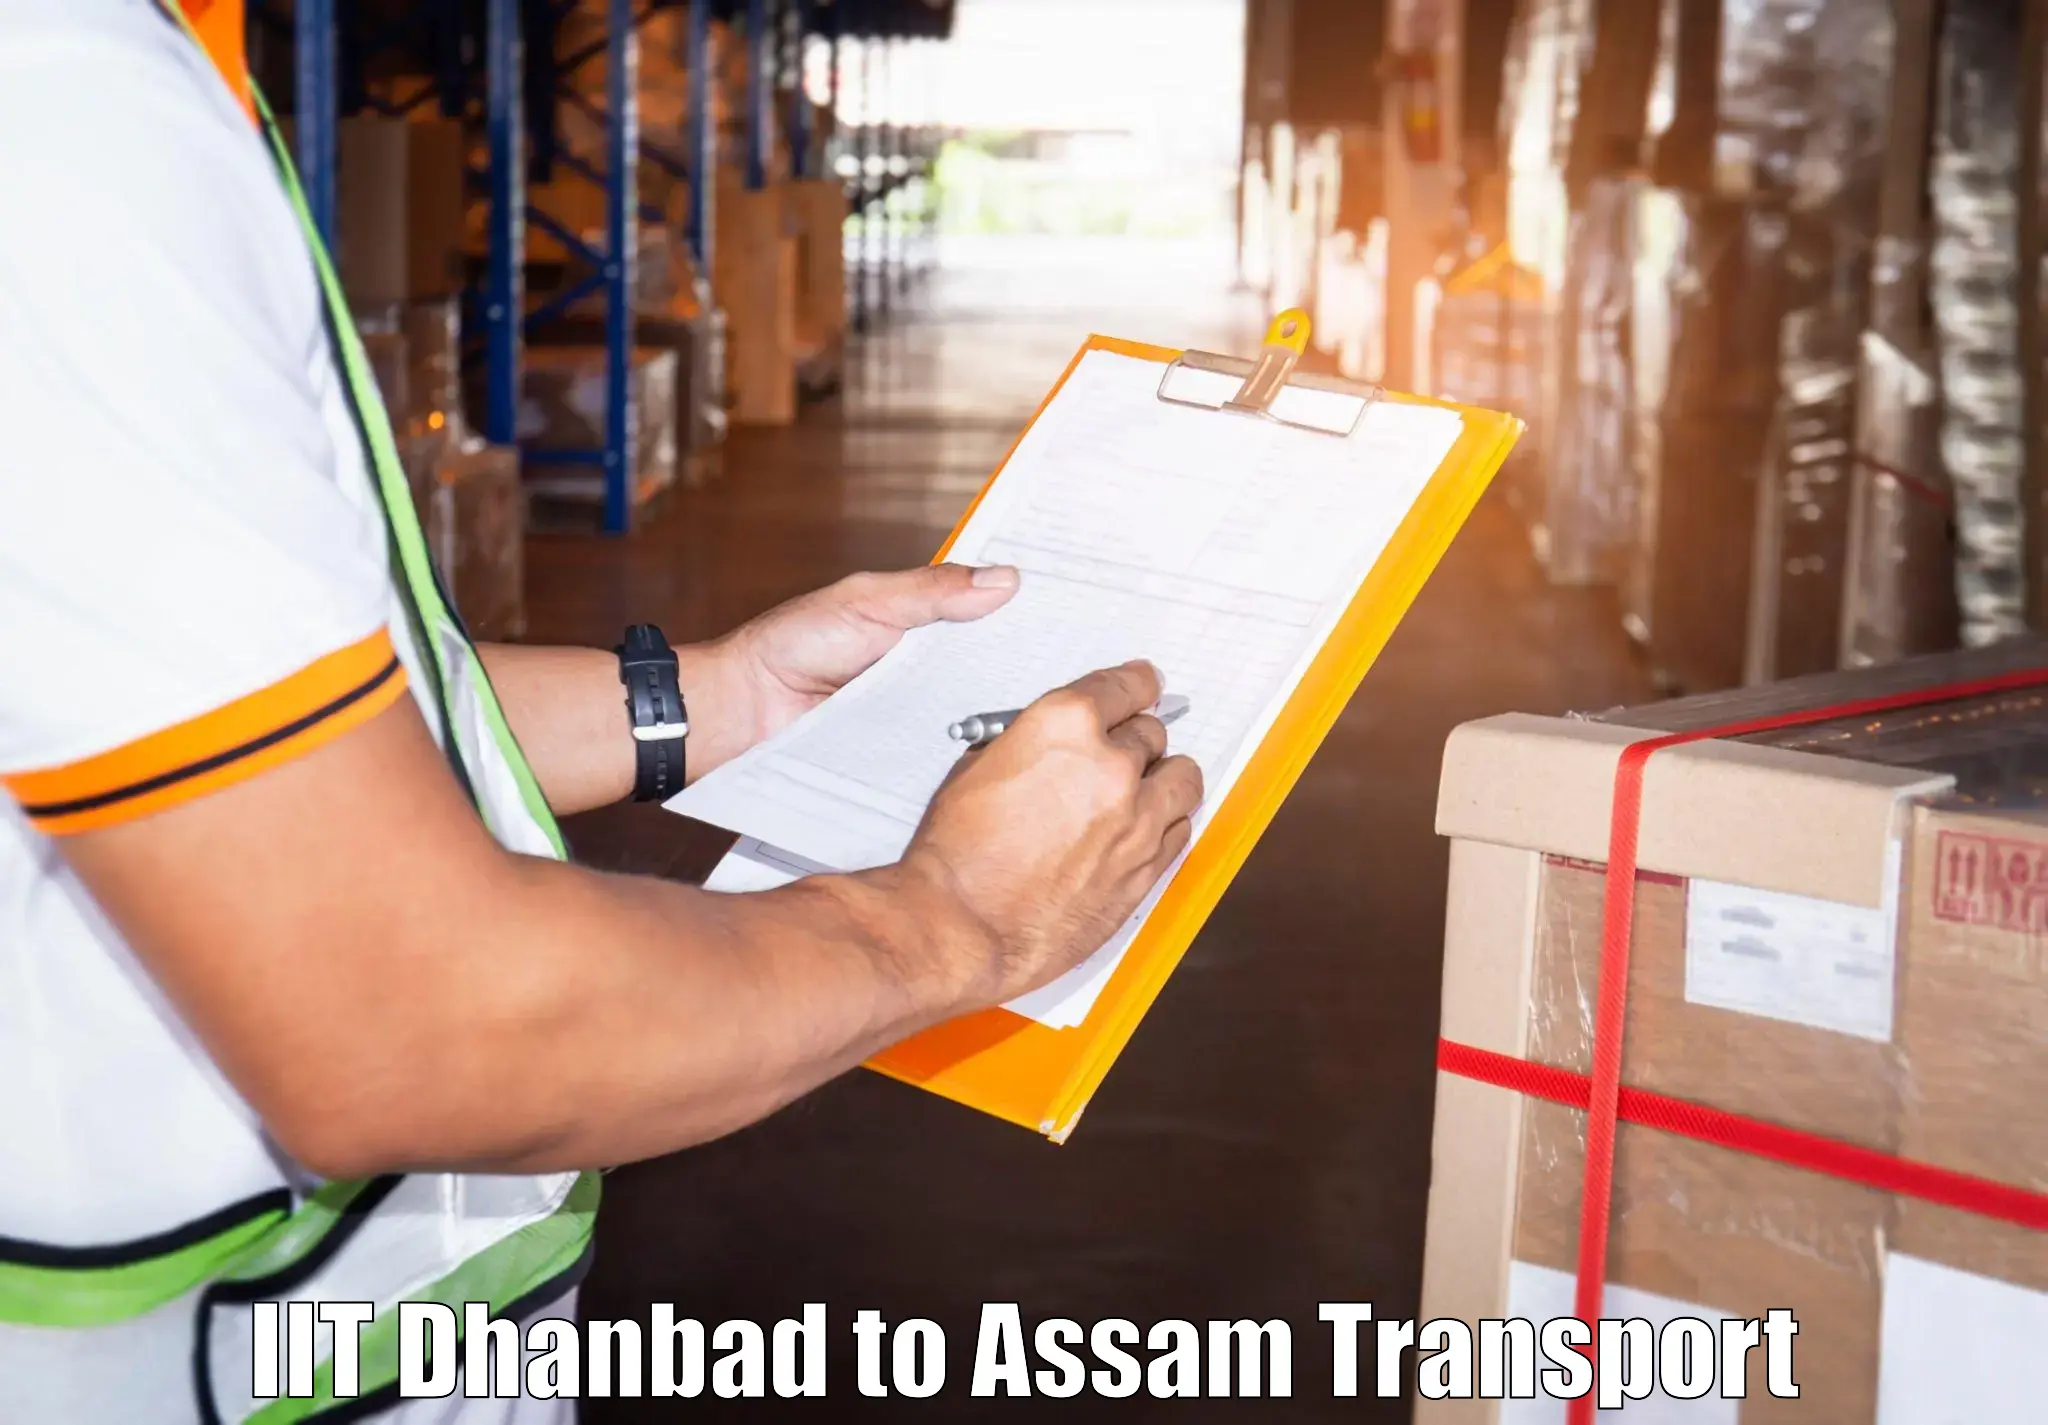 Air freight transport services IIT Dhanbad to Assam